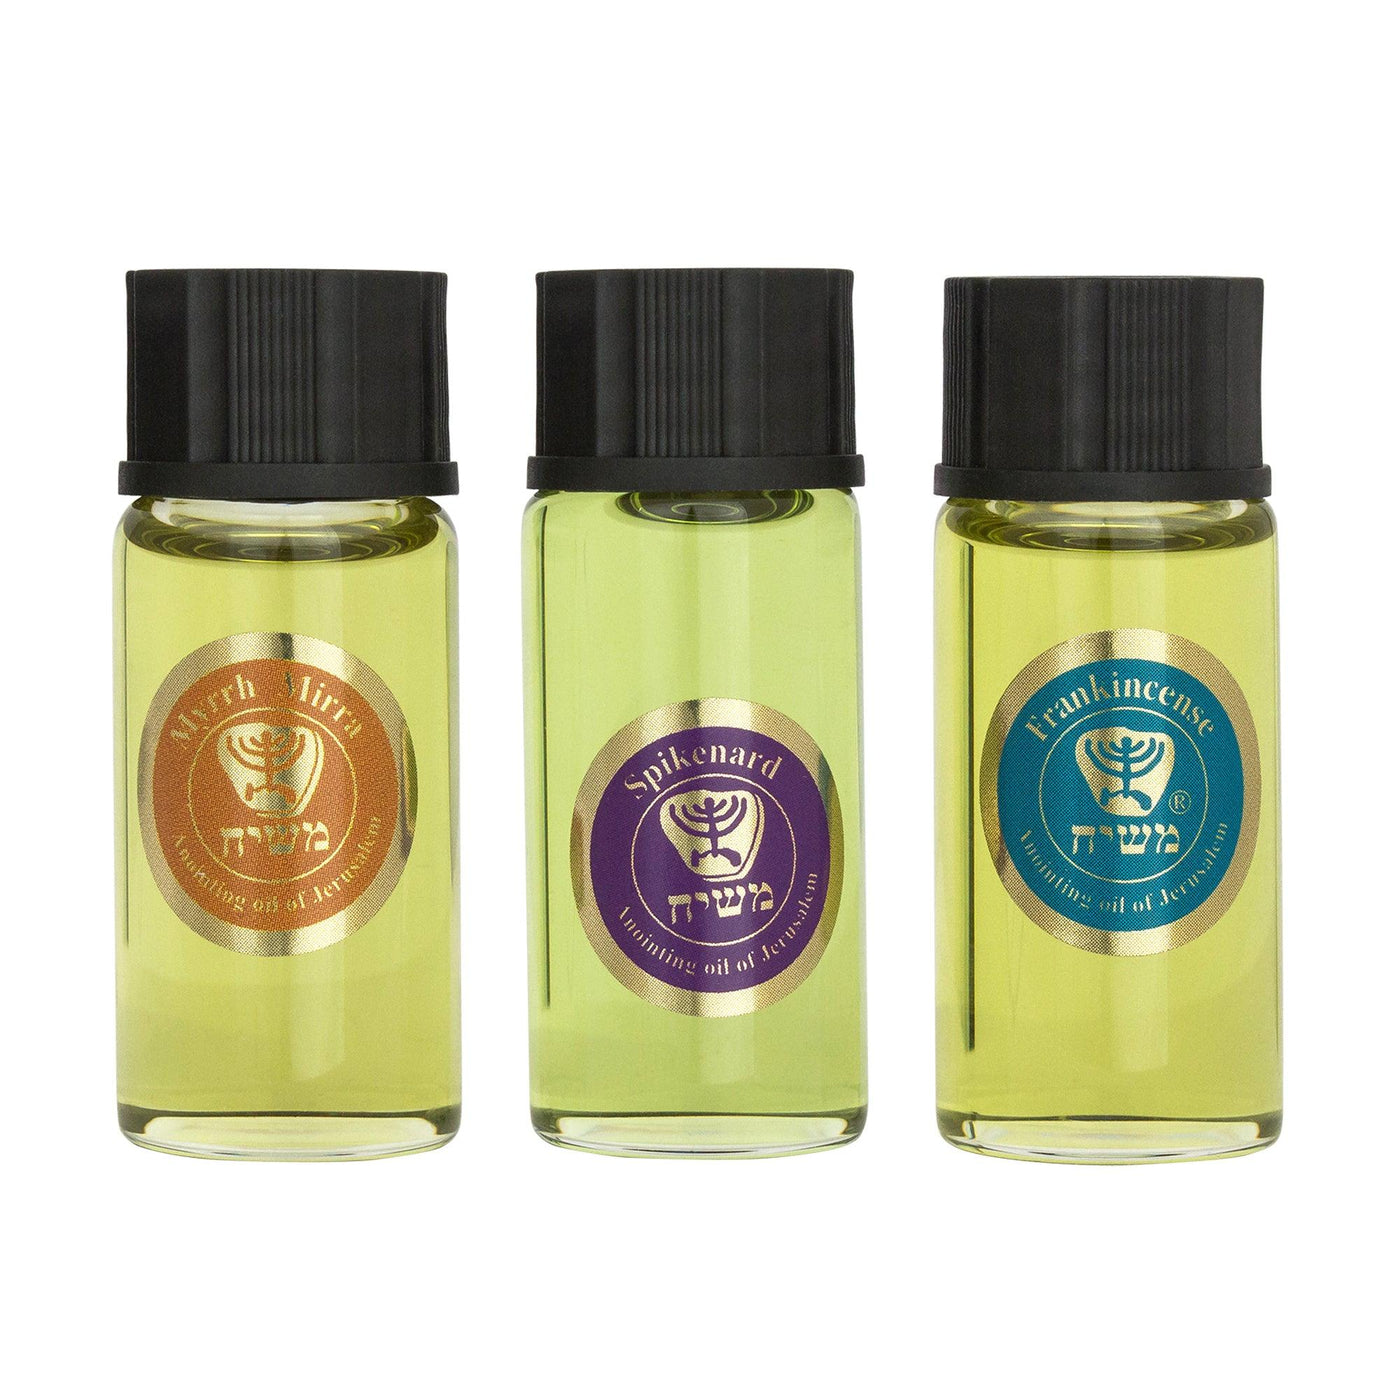 Anointing Oils of the Bible 8ml trio pack From Holy land Jerusalem - Spring Nahal